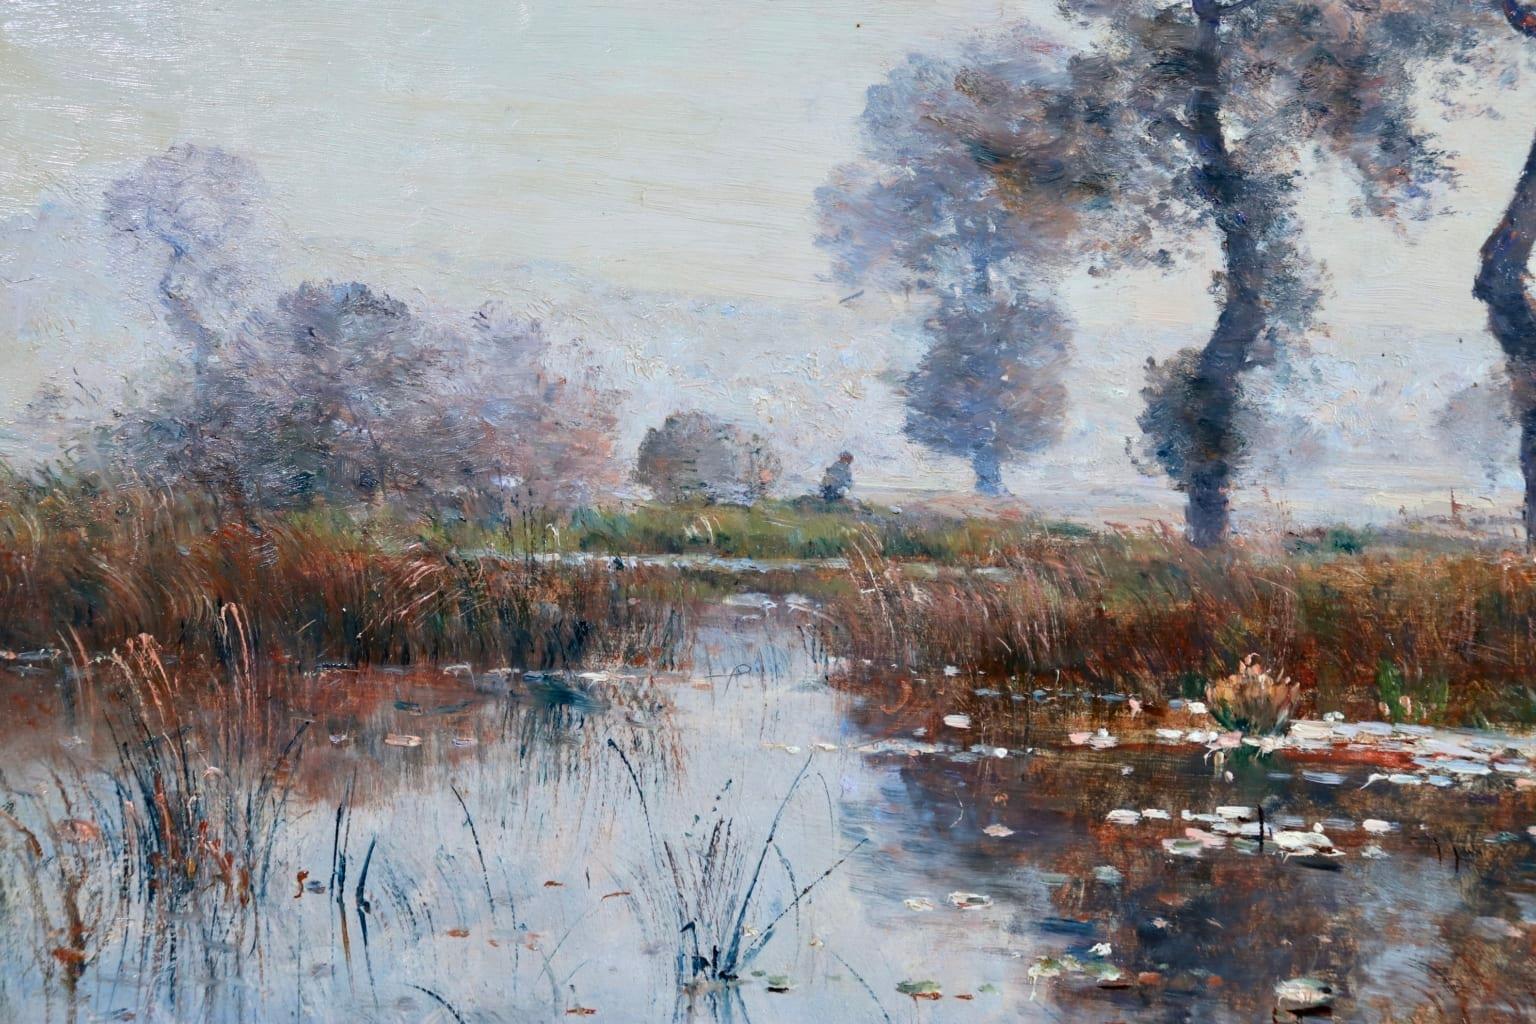 A stunning oil on canvas by French Barbizon painter Louis Aime Japy depicting water lilies on a lake in a cool autumn landscape, the almost bare trees beautifully reflected in the water.

Signature:
Signed lower right. 

Dimensions:
Framed: